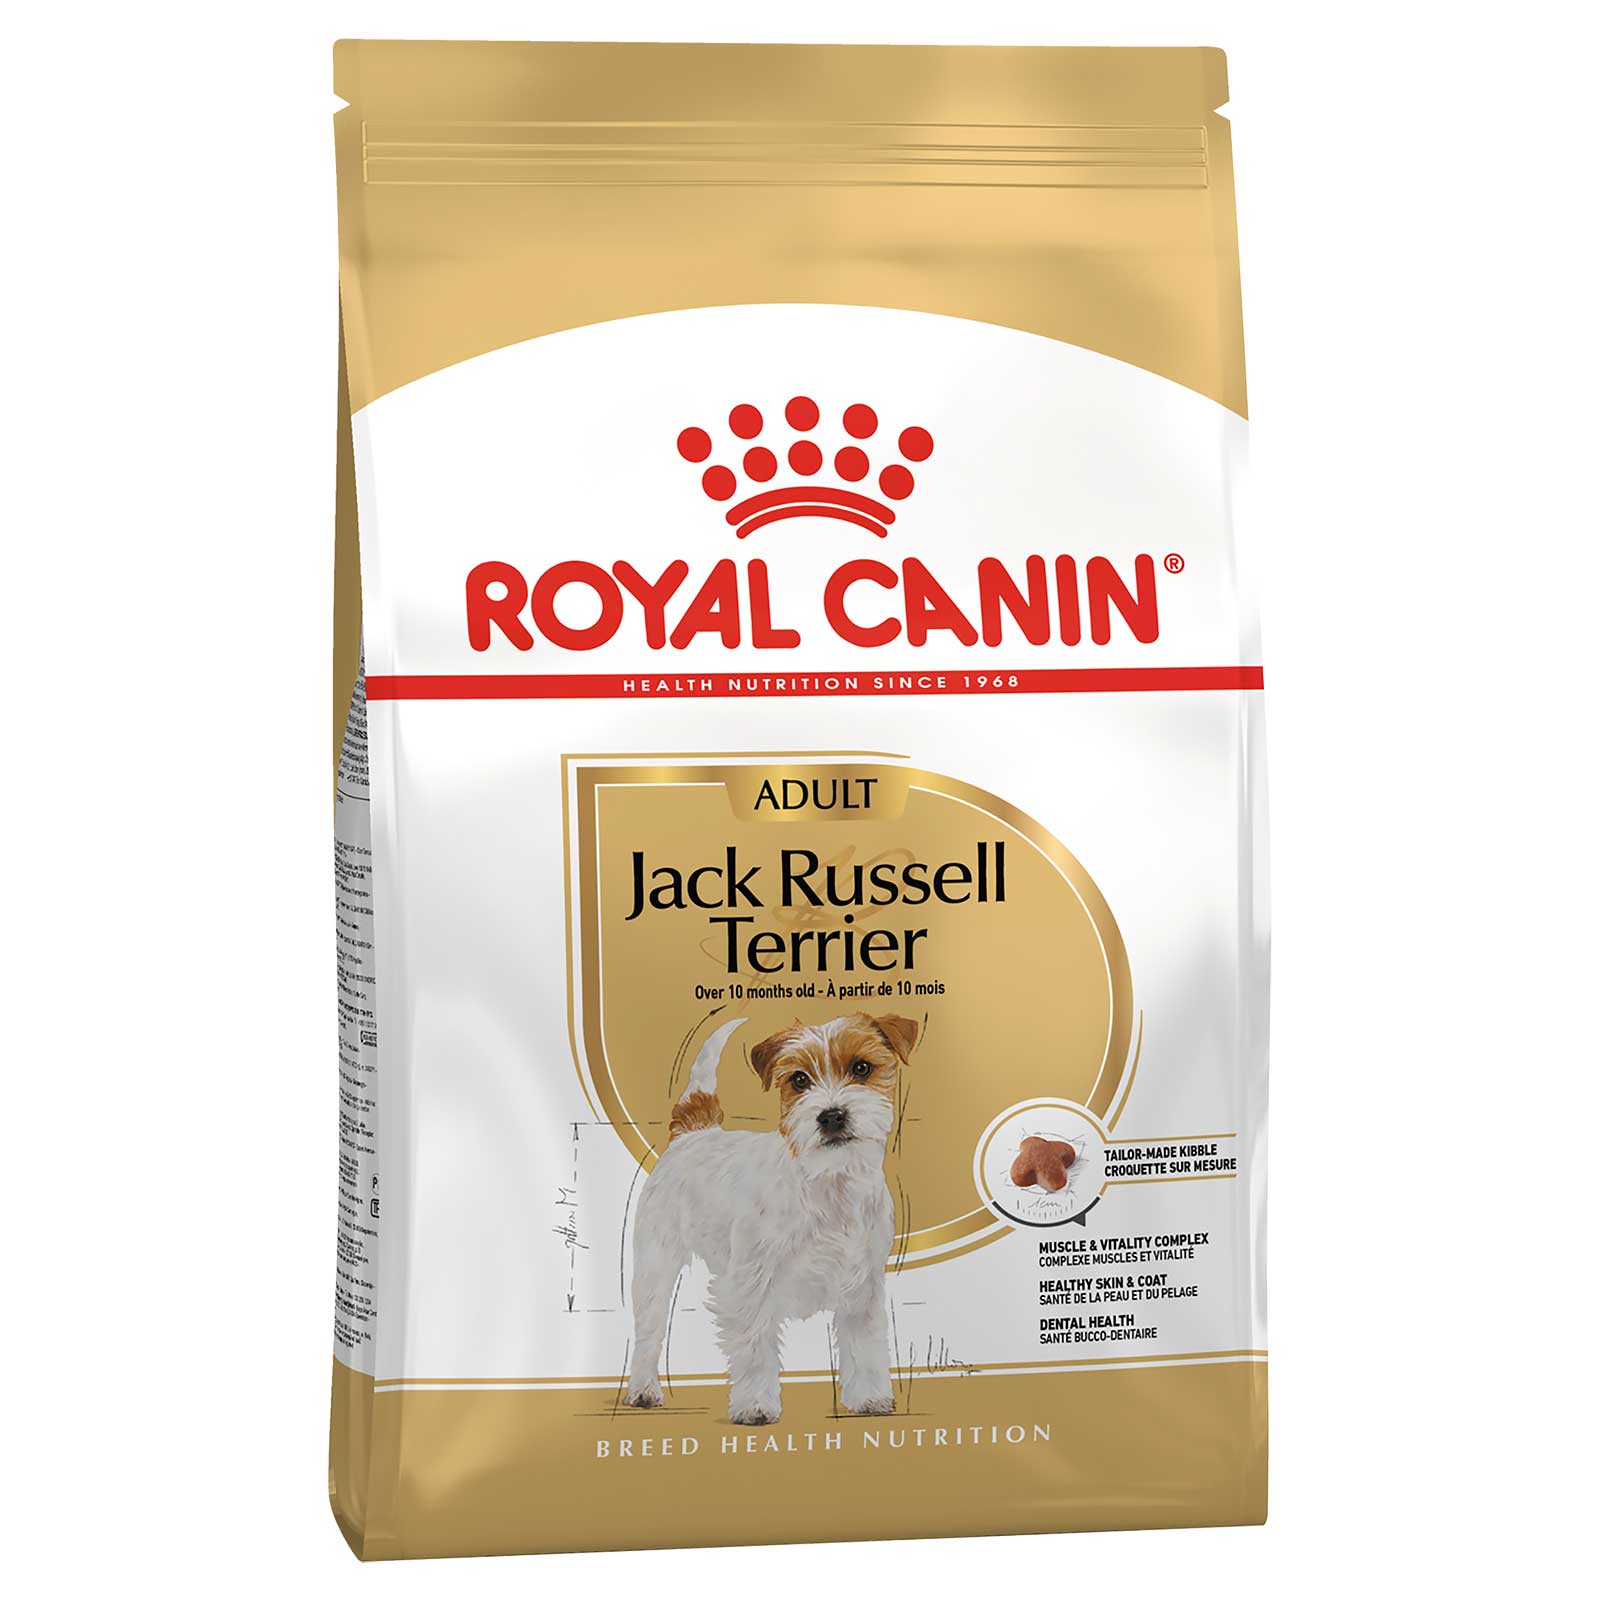 Royal Canin Dog Food Adult Jack Russell Terrier